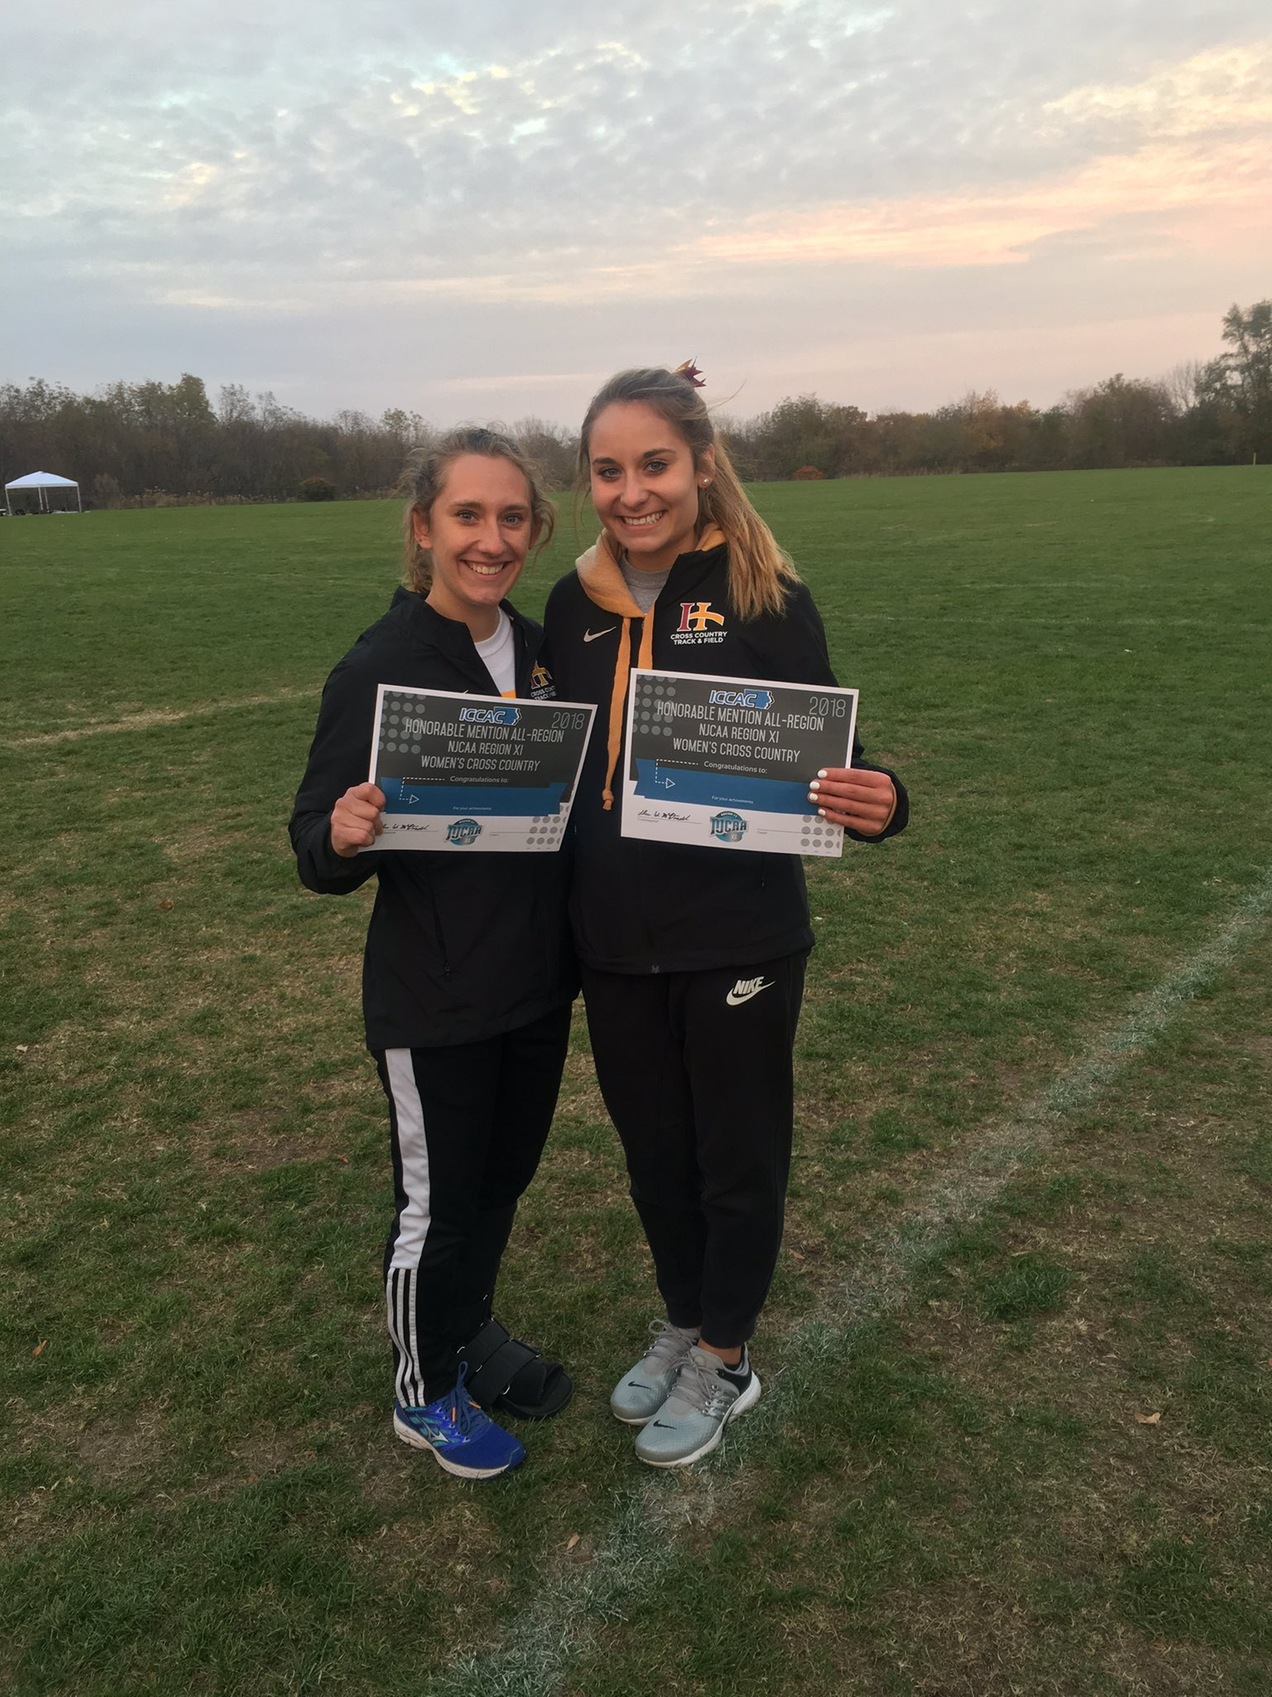 Sophomores Kaylee Ford (right) & Ashlyn Elmore (left) earn All-Region Honors at the Region XI Championships Friday evening!